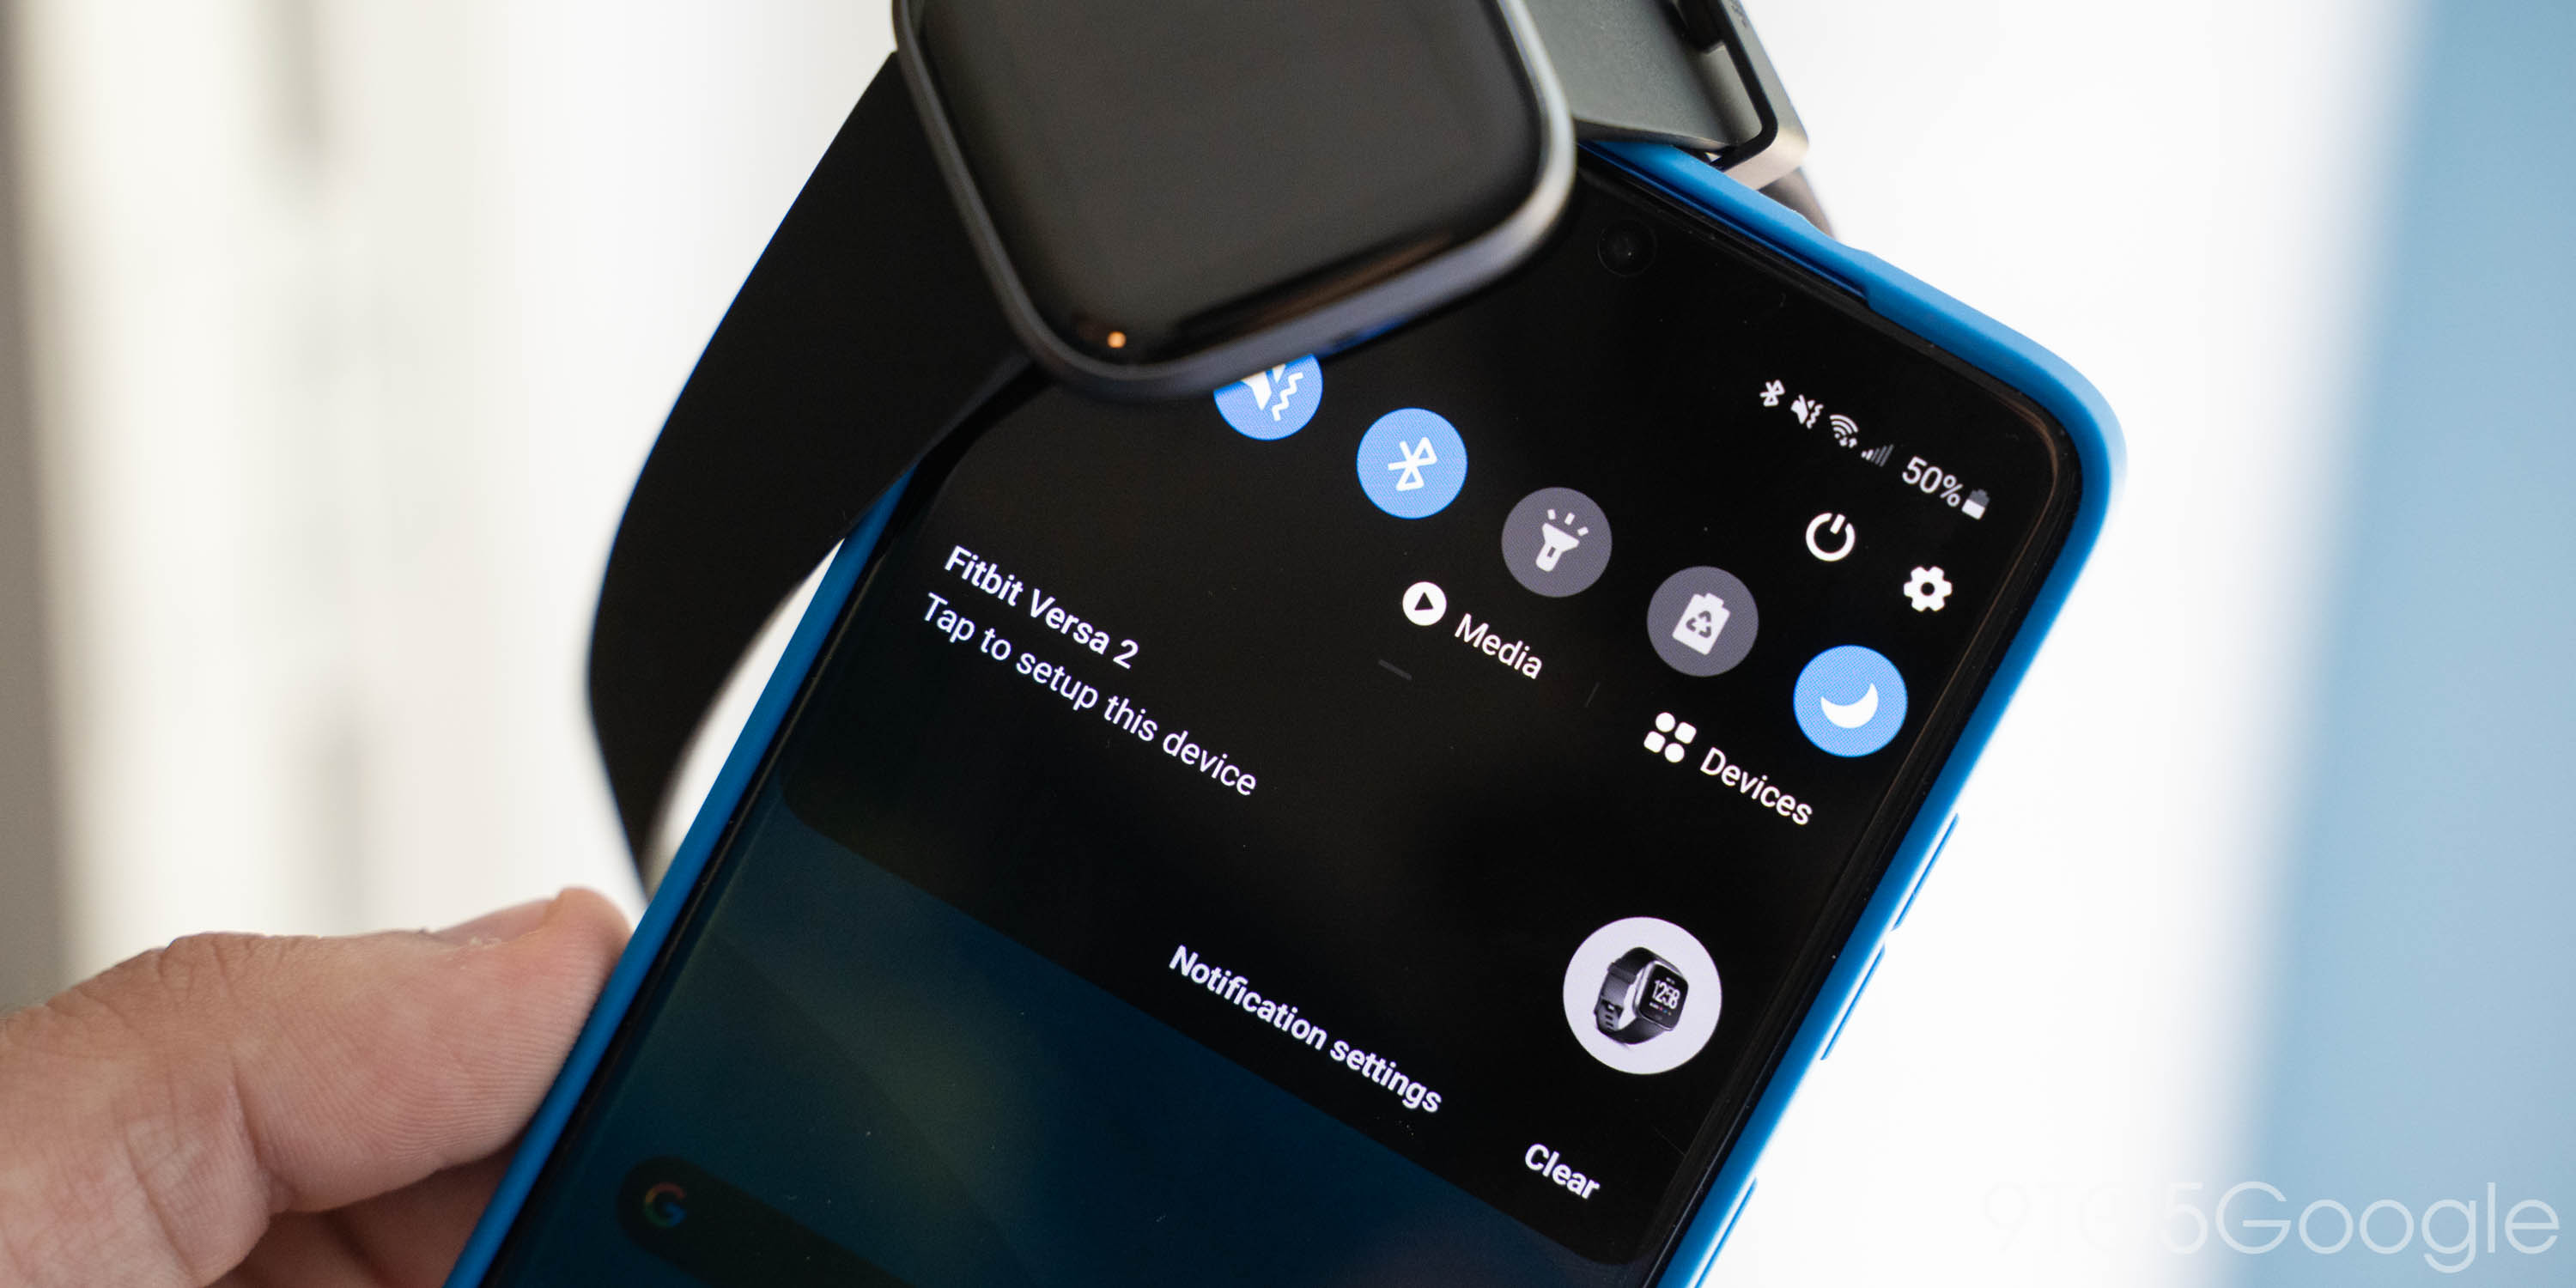 Fitbit now sends setup notifications to nearby Android 9to5Google